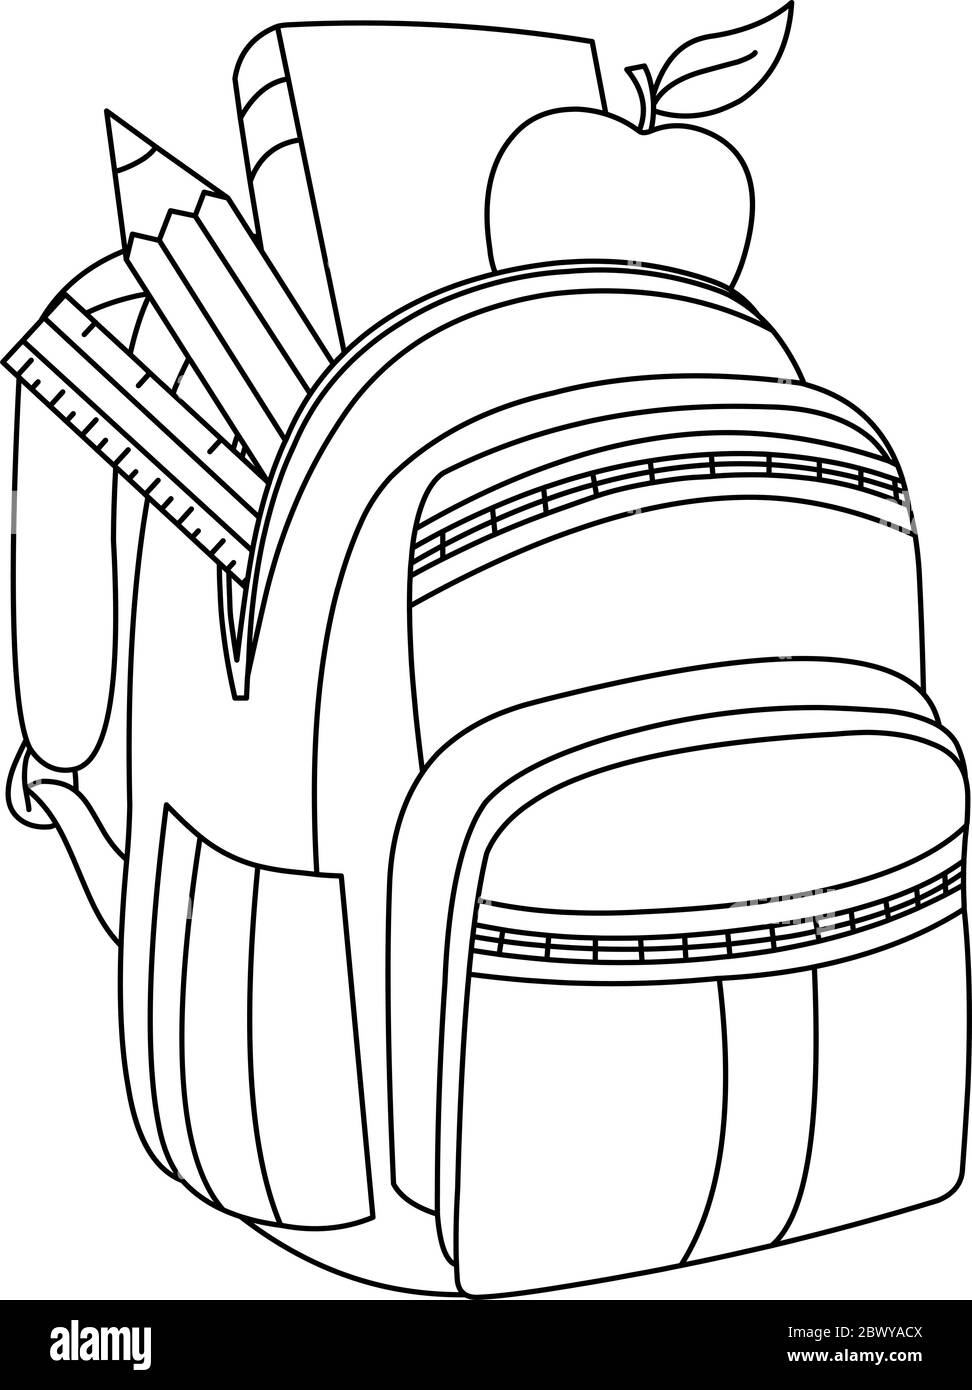 Outlined School Backpack Vector Illustration Coloring Page Stock Vector Image Art Alamy